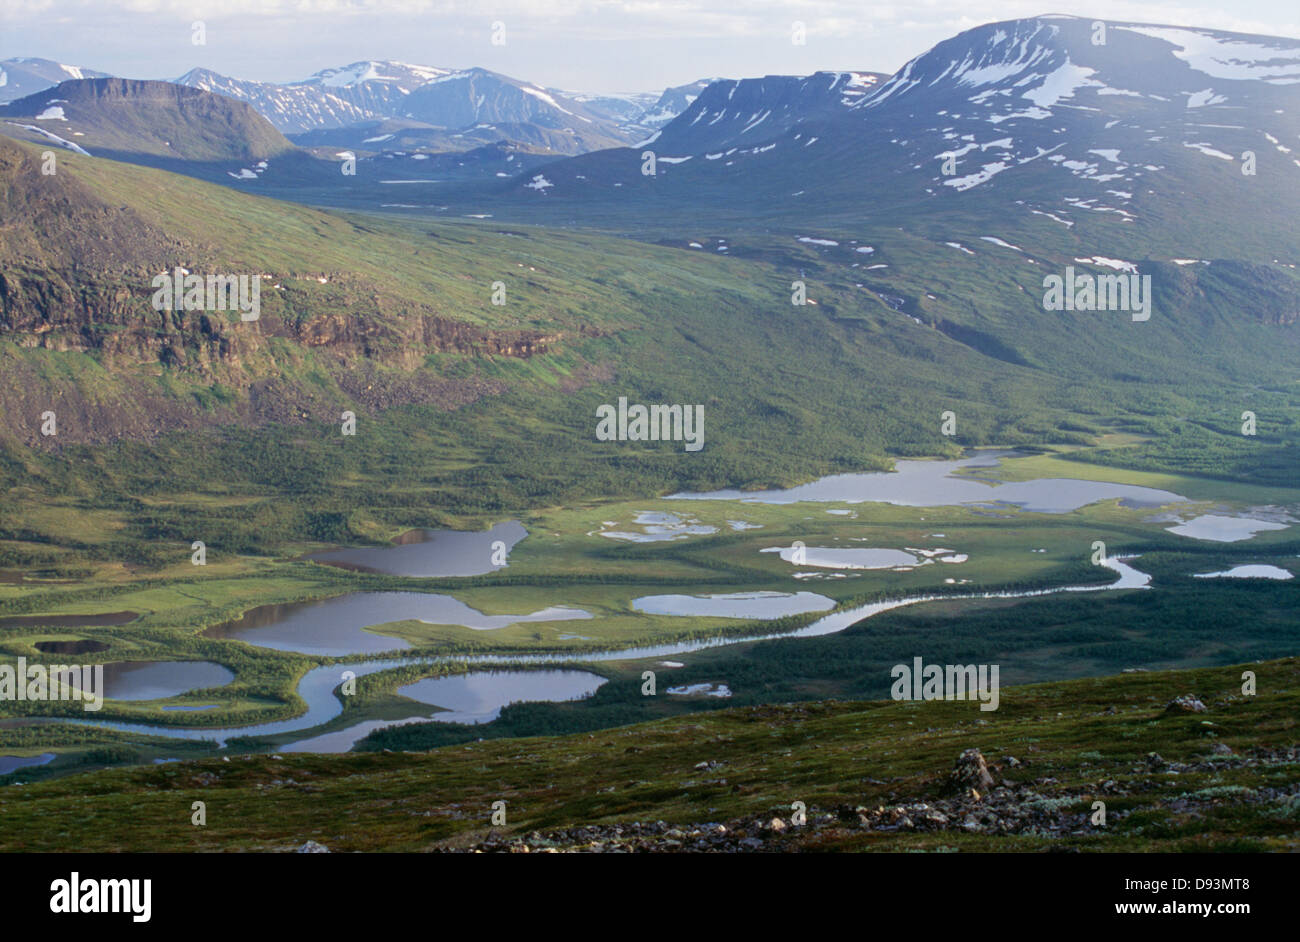 Snowy mountains and lake, elevated view Stock Photo